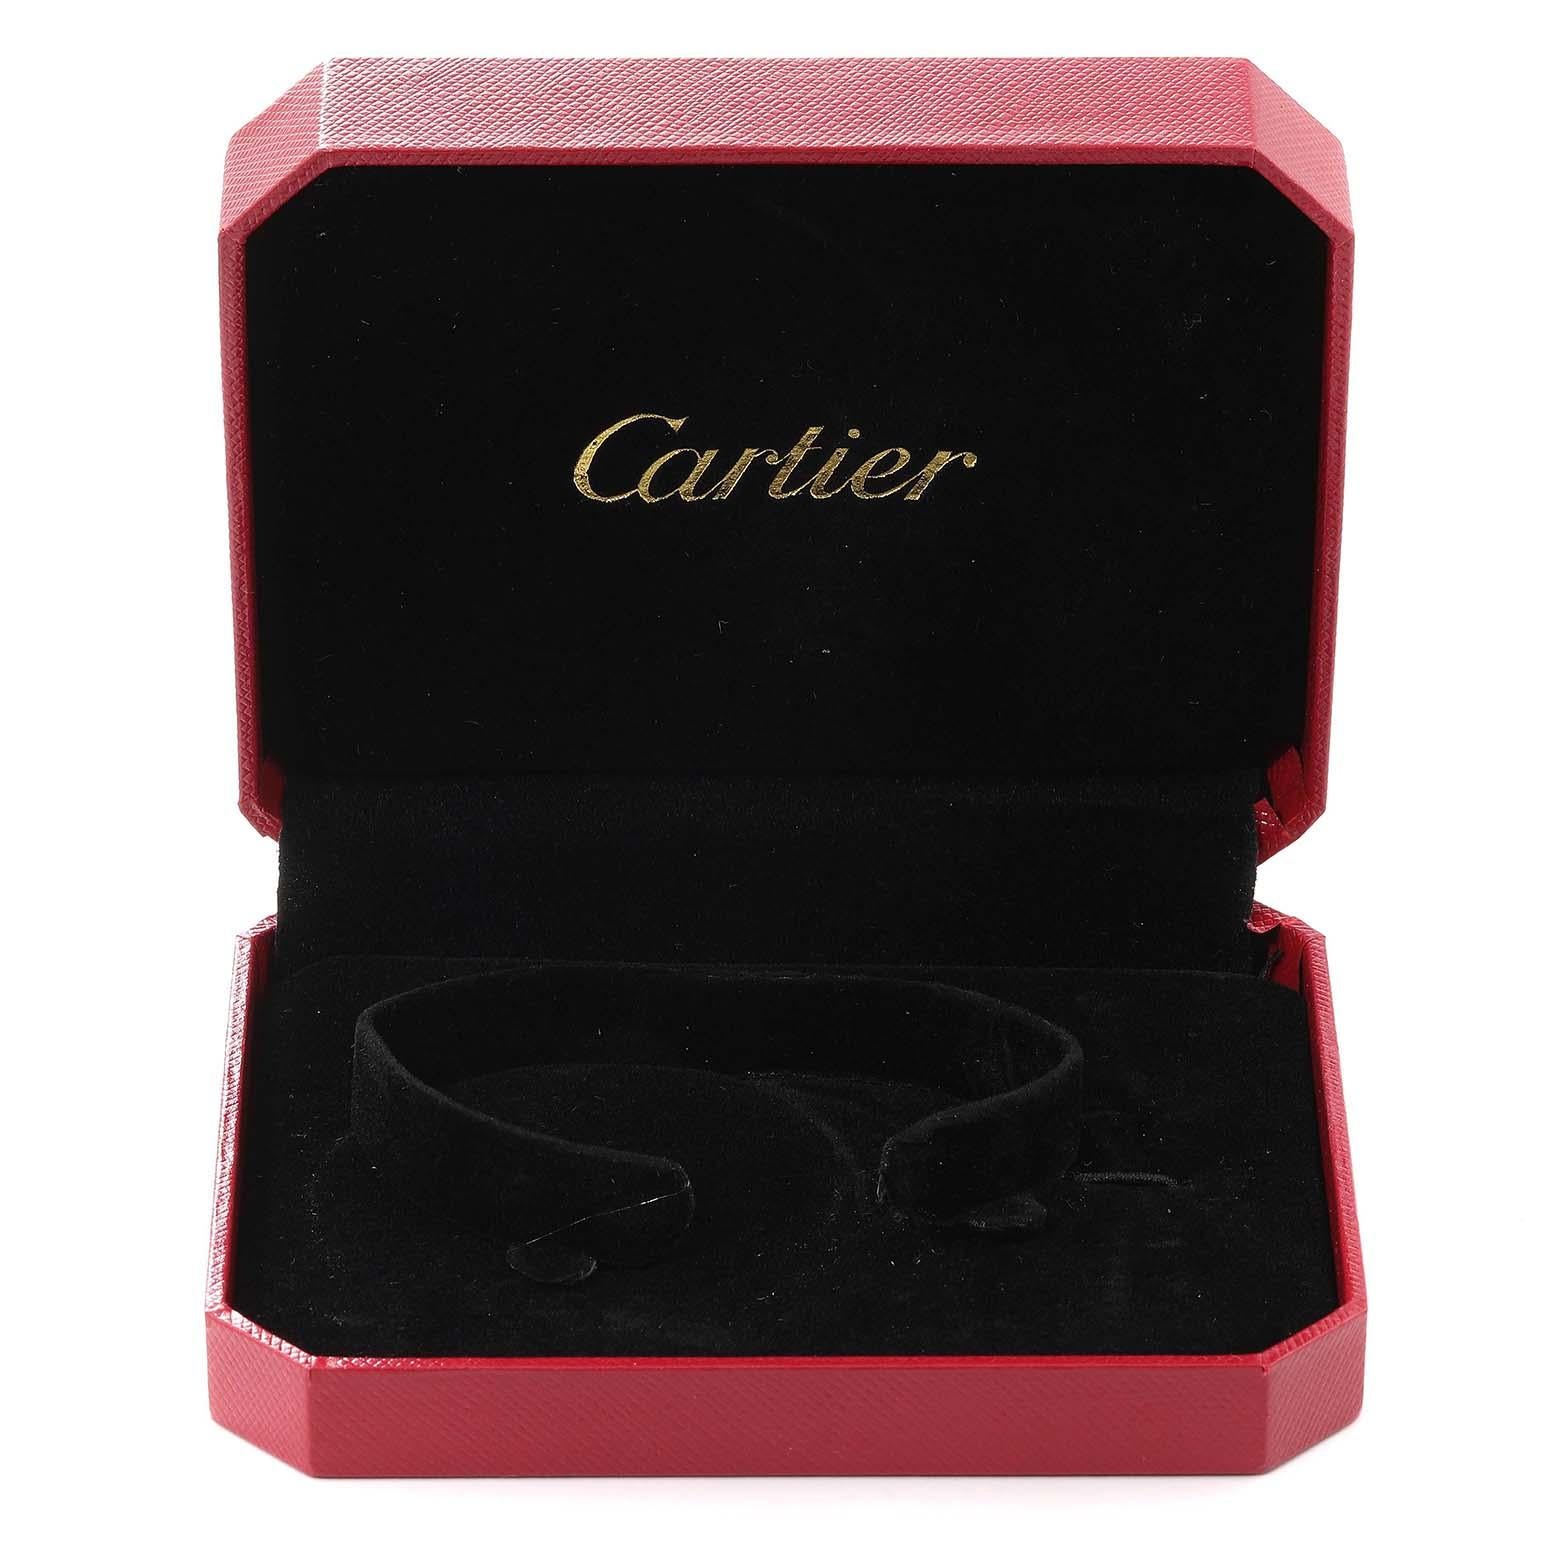 Cartier Panthere Yellow Gold Ladies Watch 107000 5